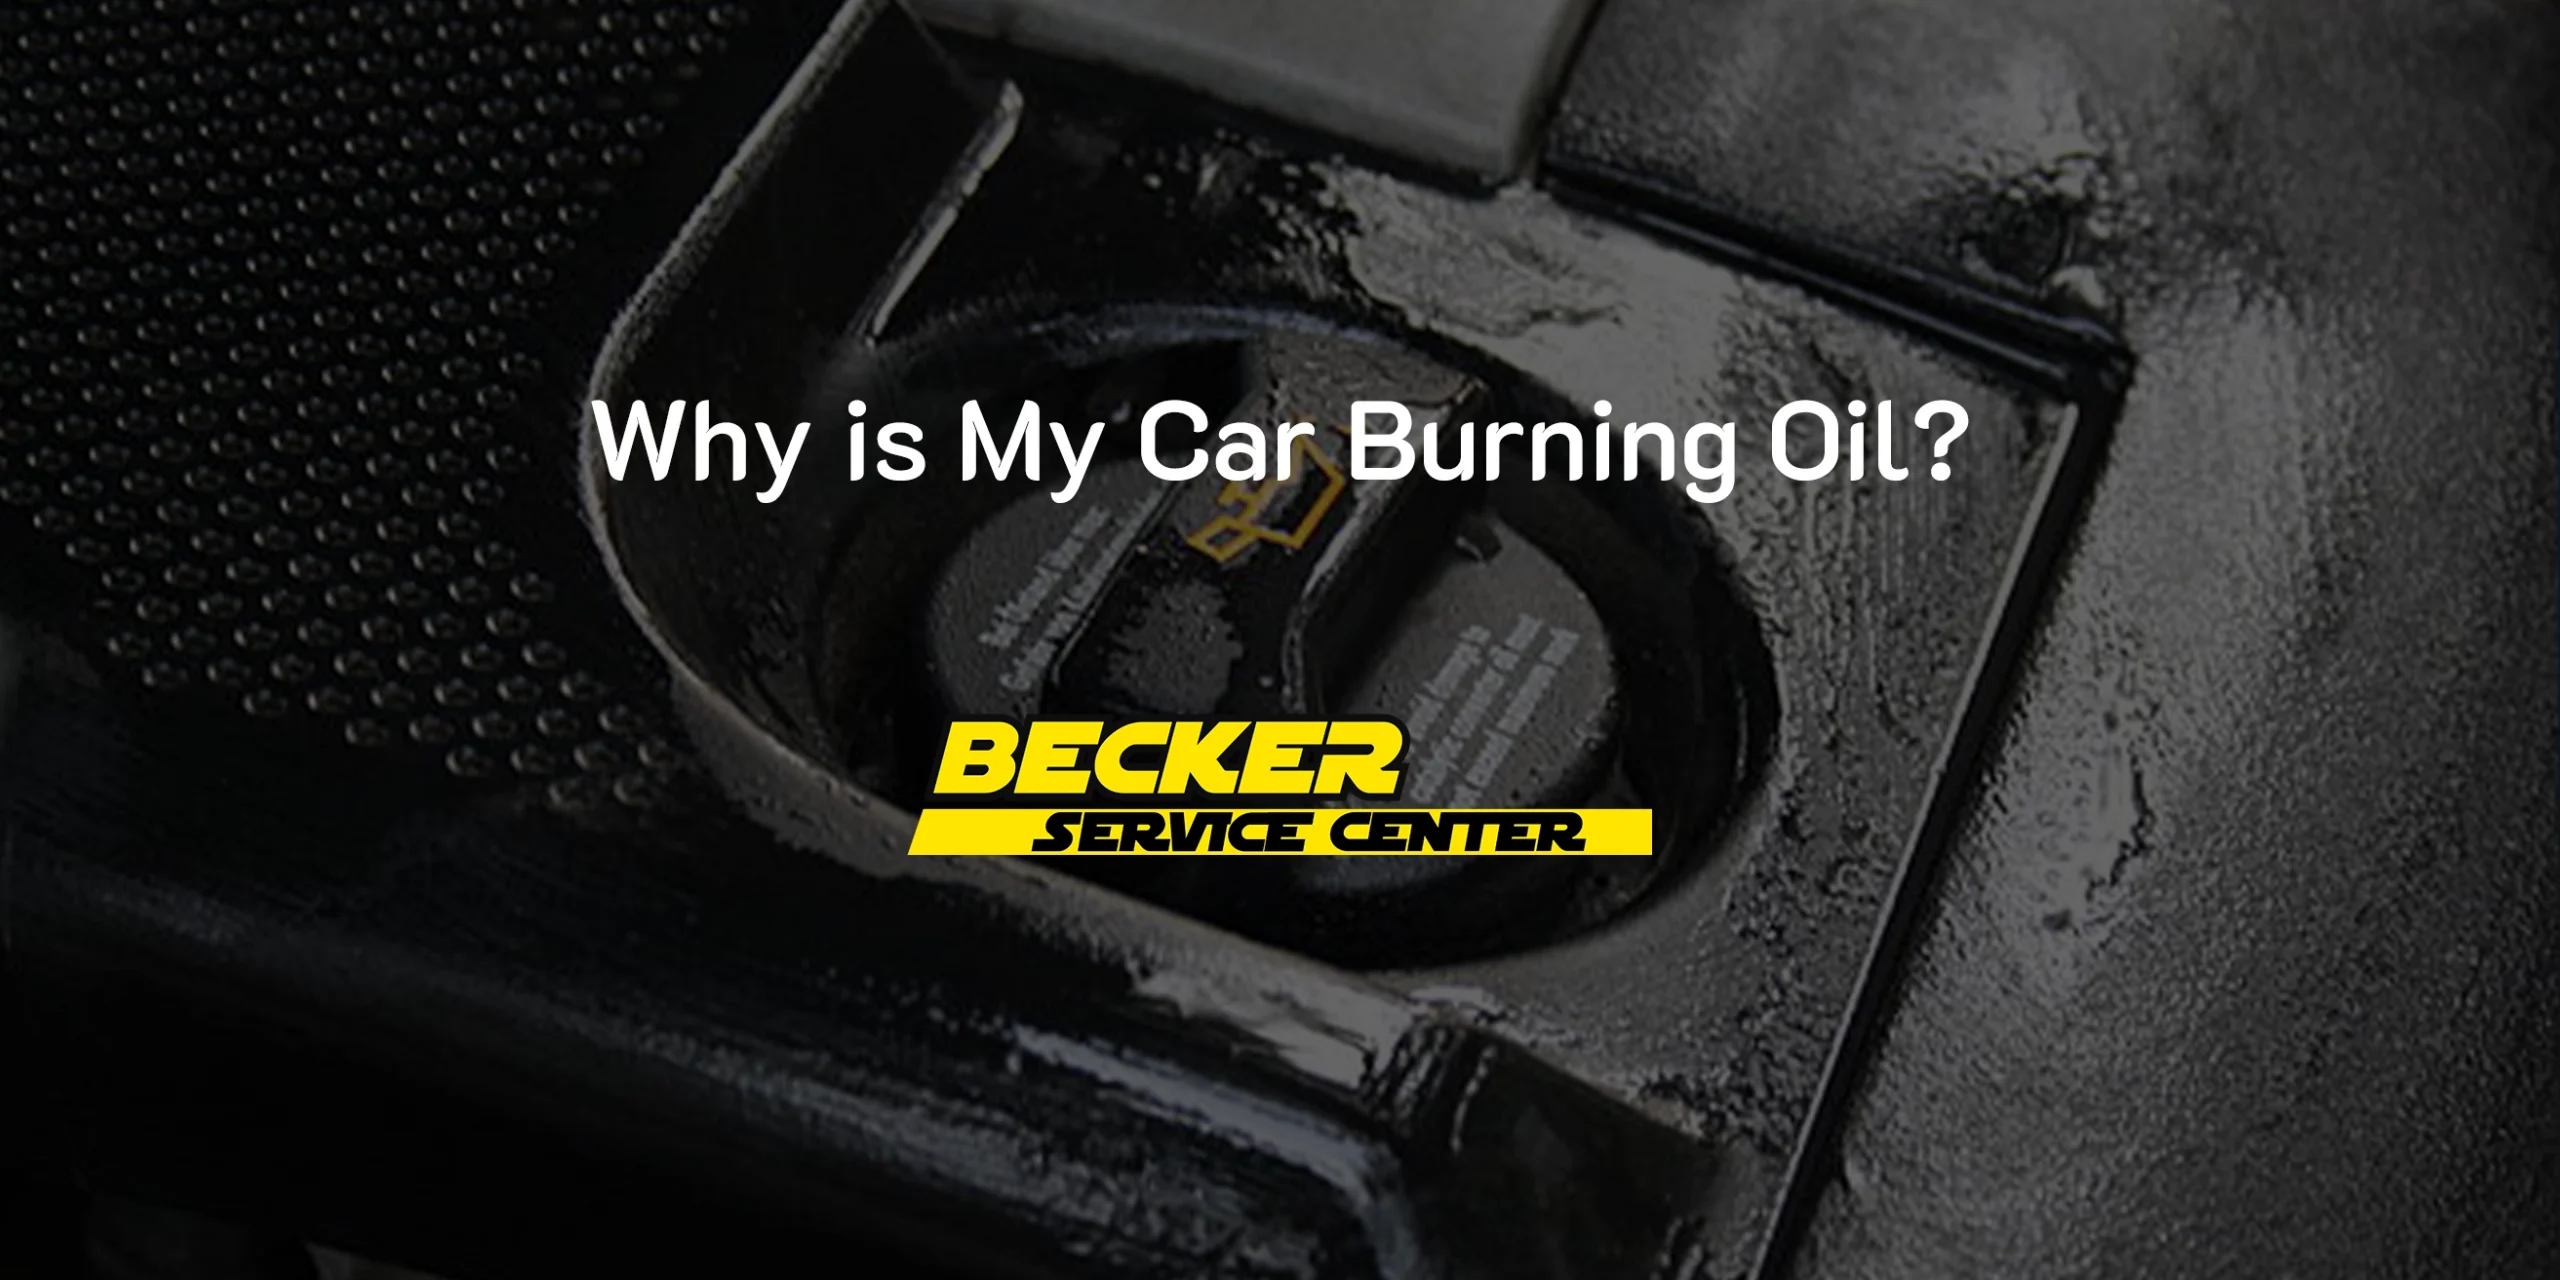 Why is My Car Burning Oil?